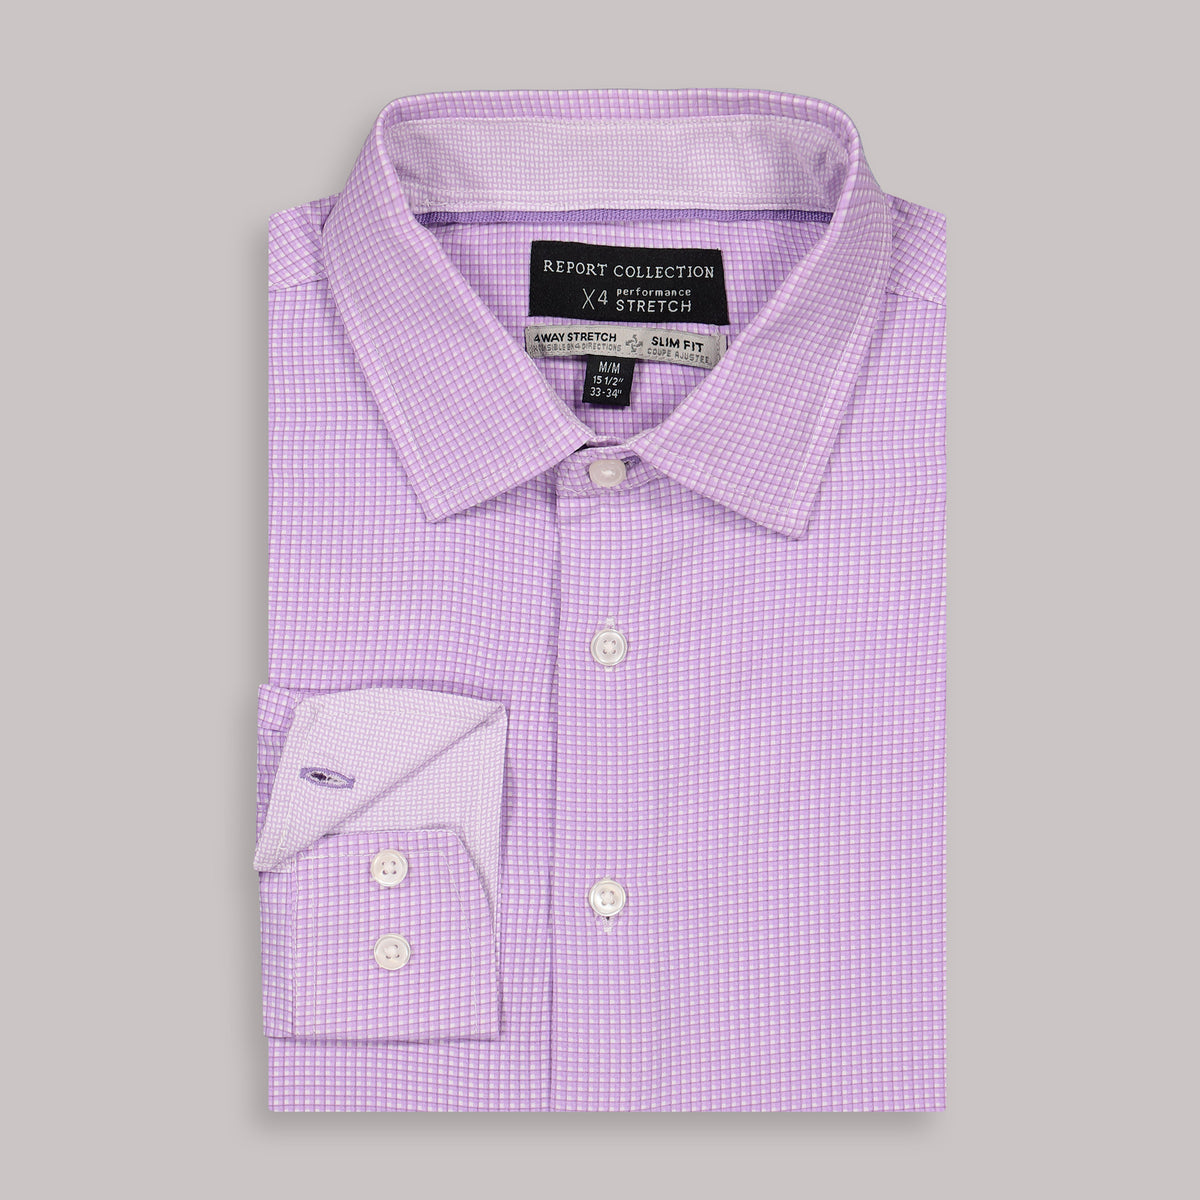 Folded View of Long Sleeve 4-Way Dress Shirt with Check Print in Lavender